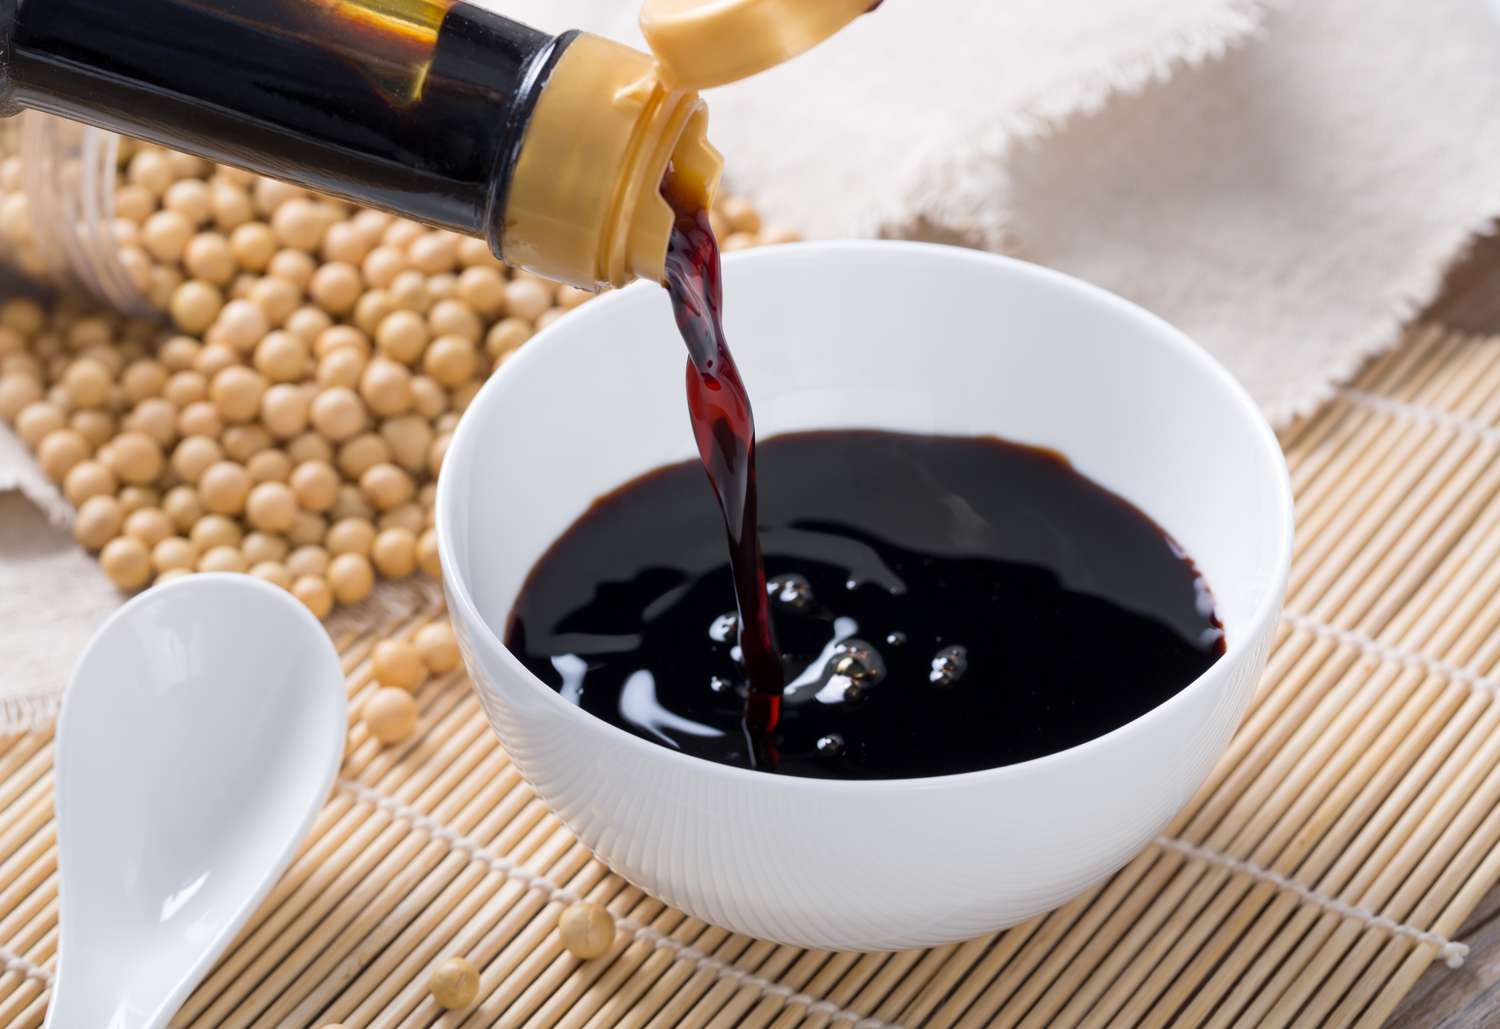 How To Store Soy Sauce After Opening